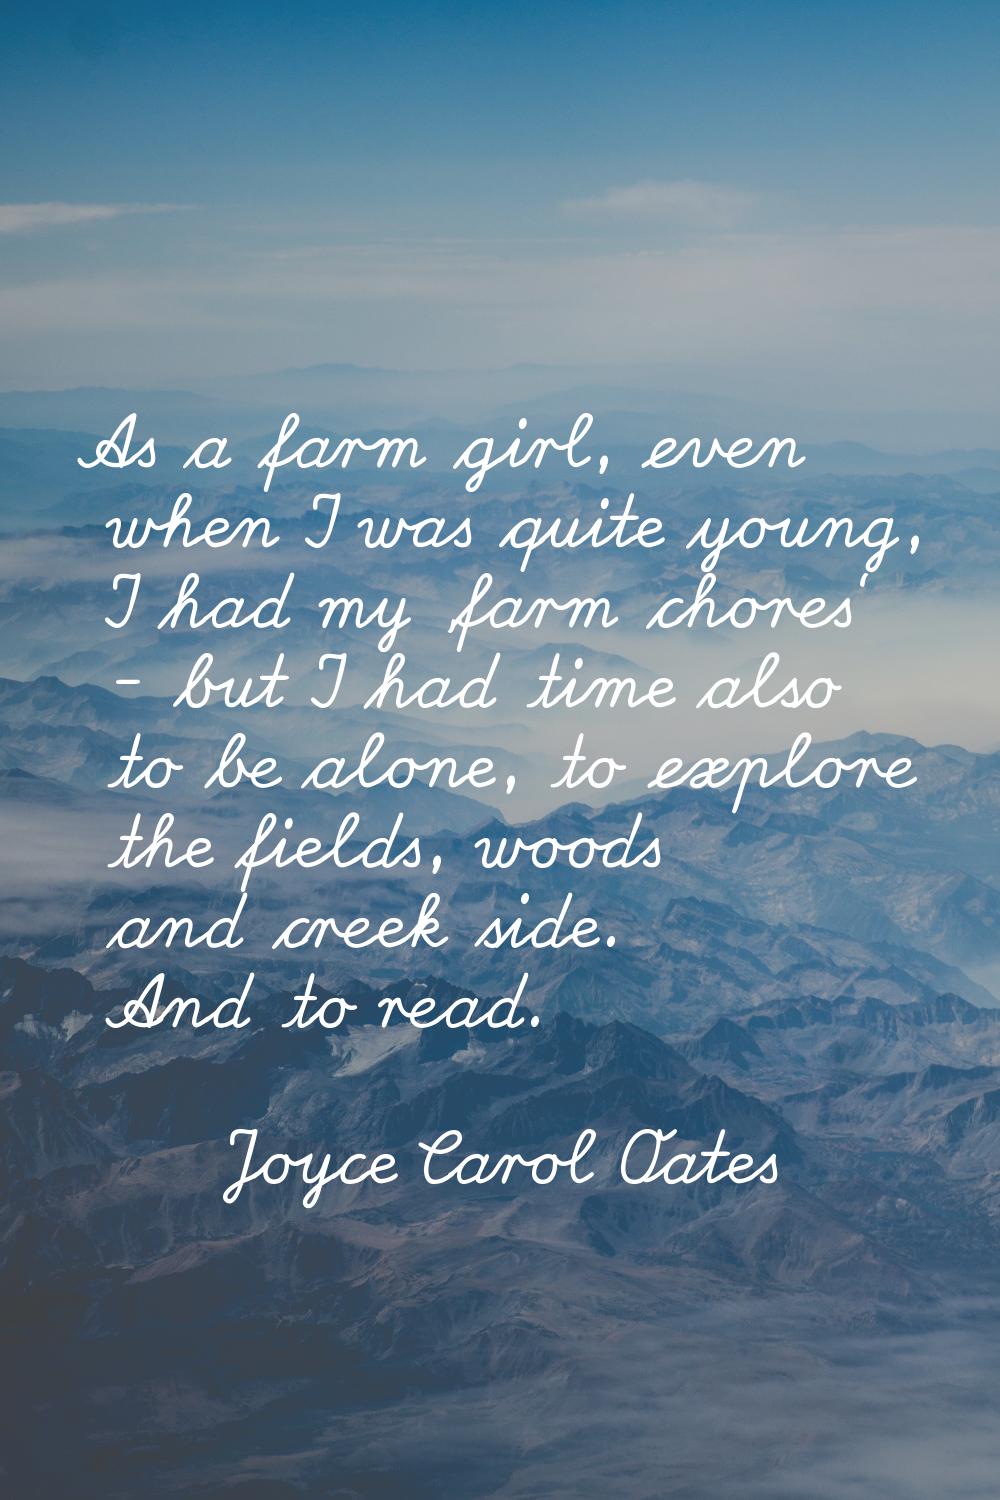 As a farm girl, even when I was quite young, I had my 'farm chores' - but I had time also to be alo